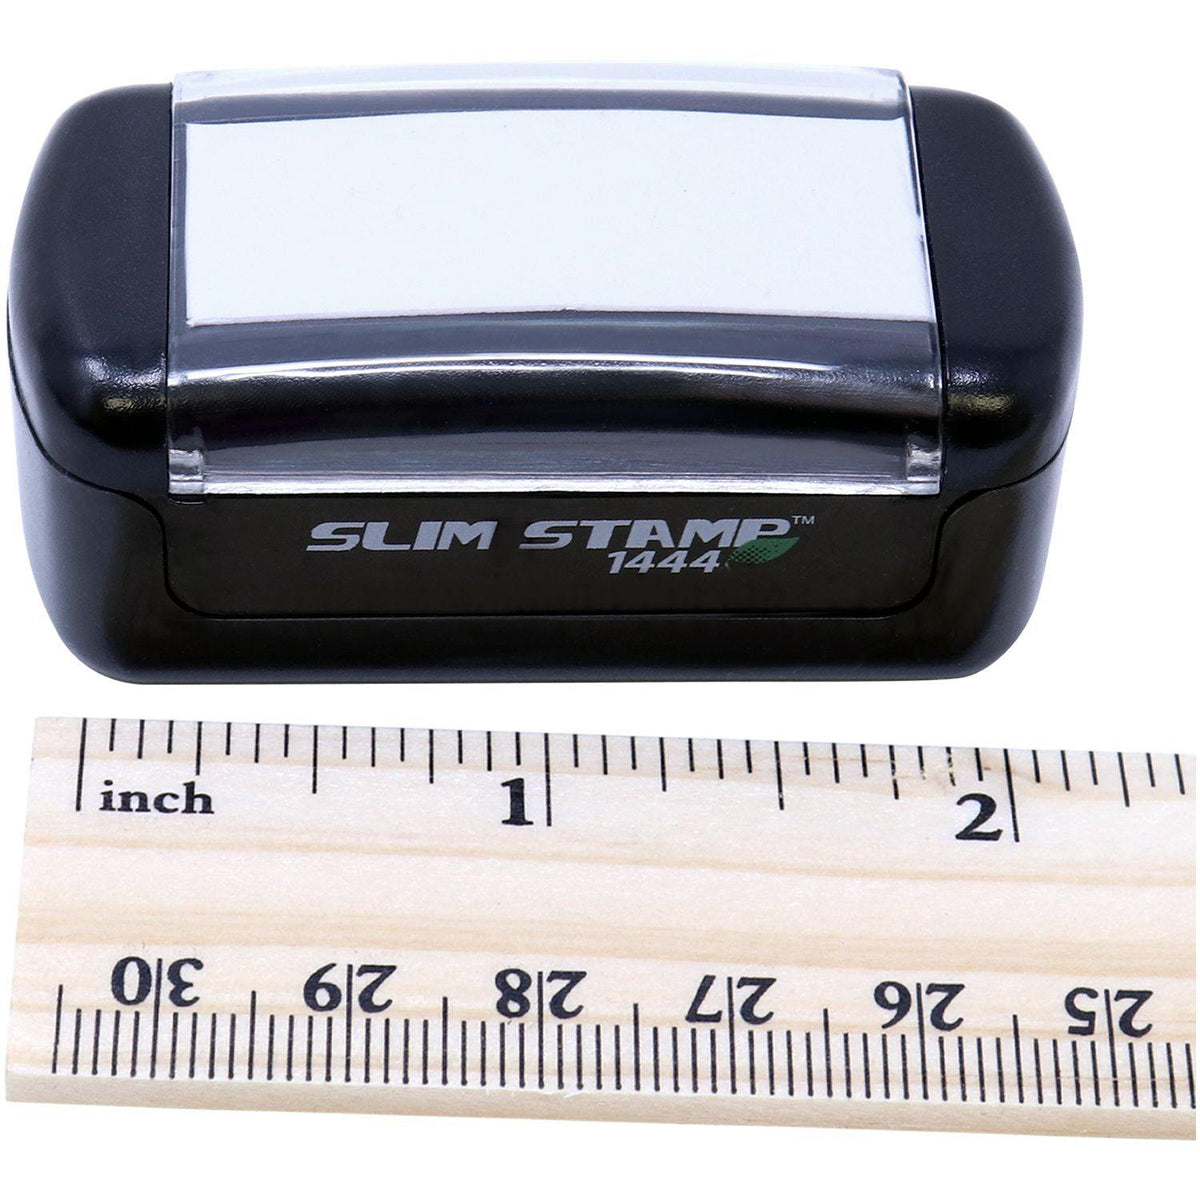 Measurement Slim Pre-Inked Standard Mail A Stamp with Ruler